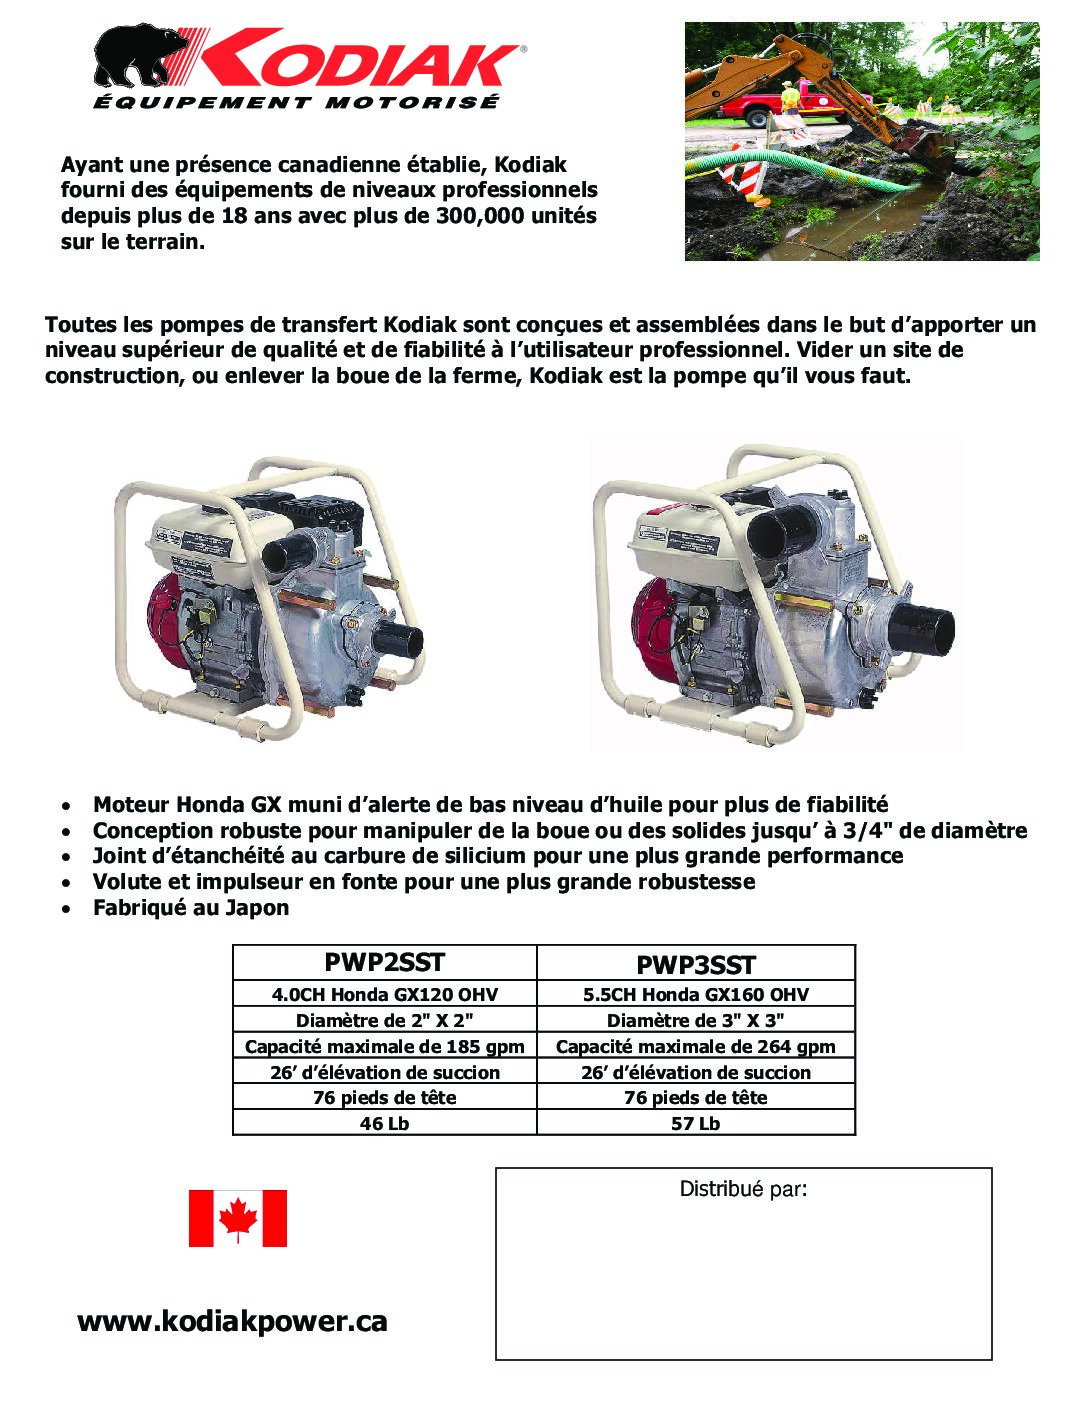 PWP3SST French Brochure